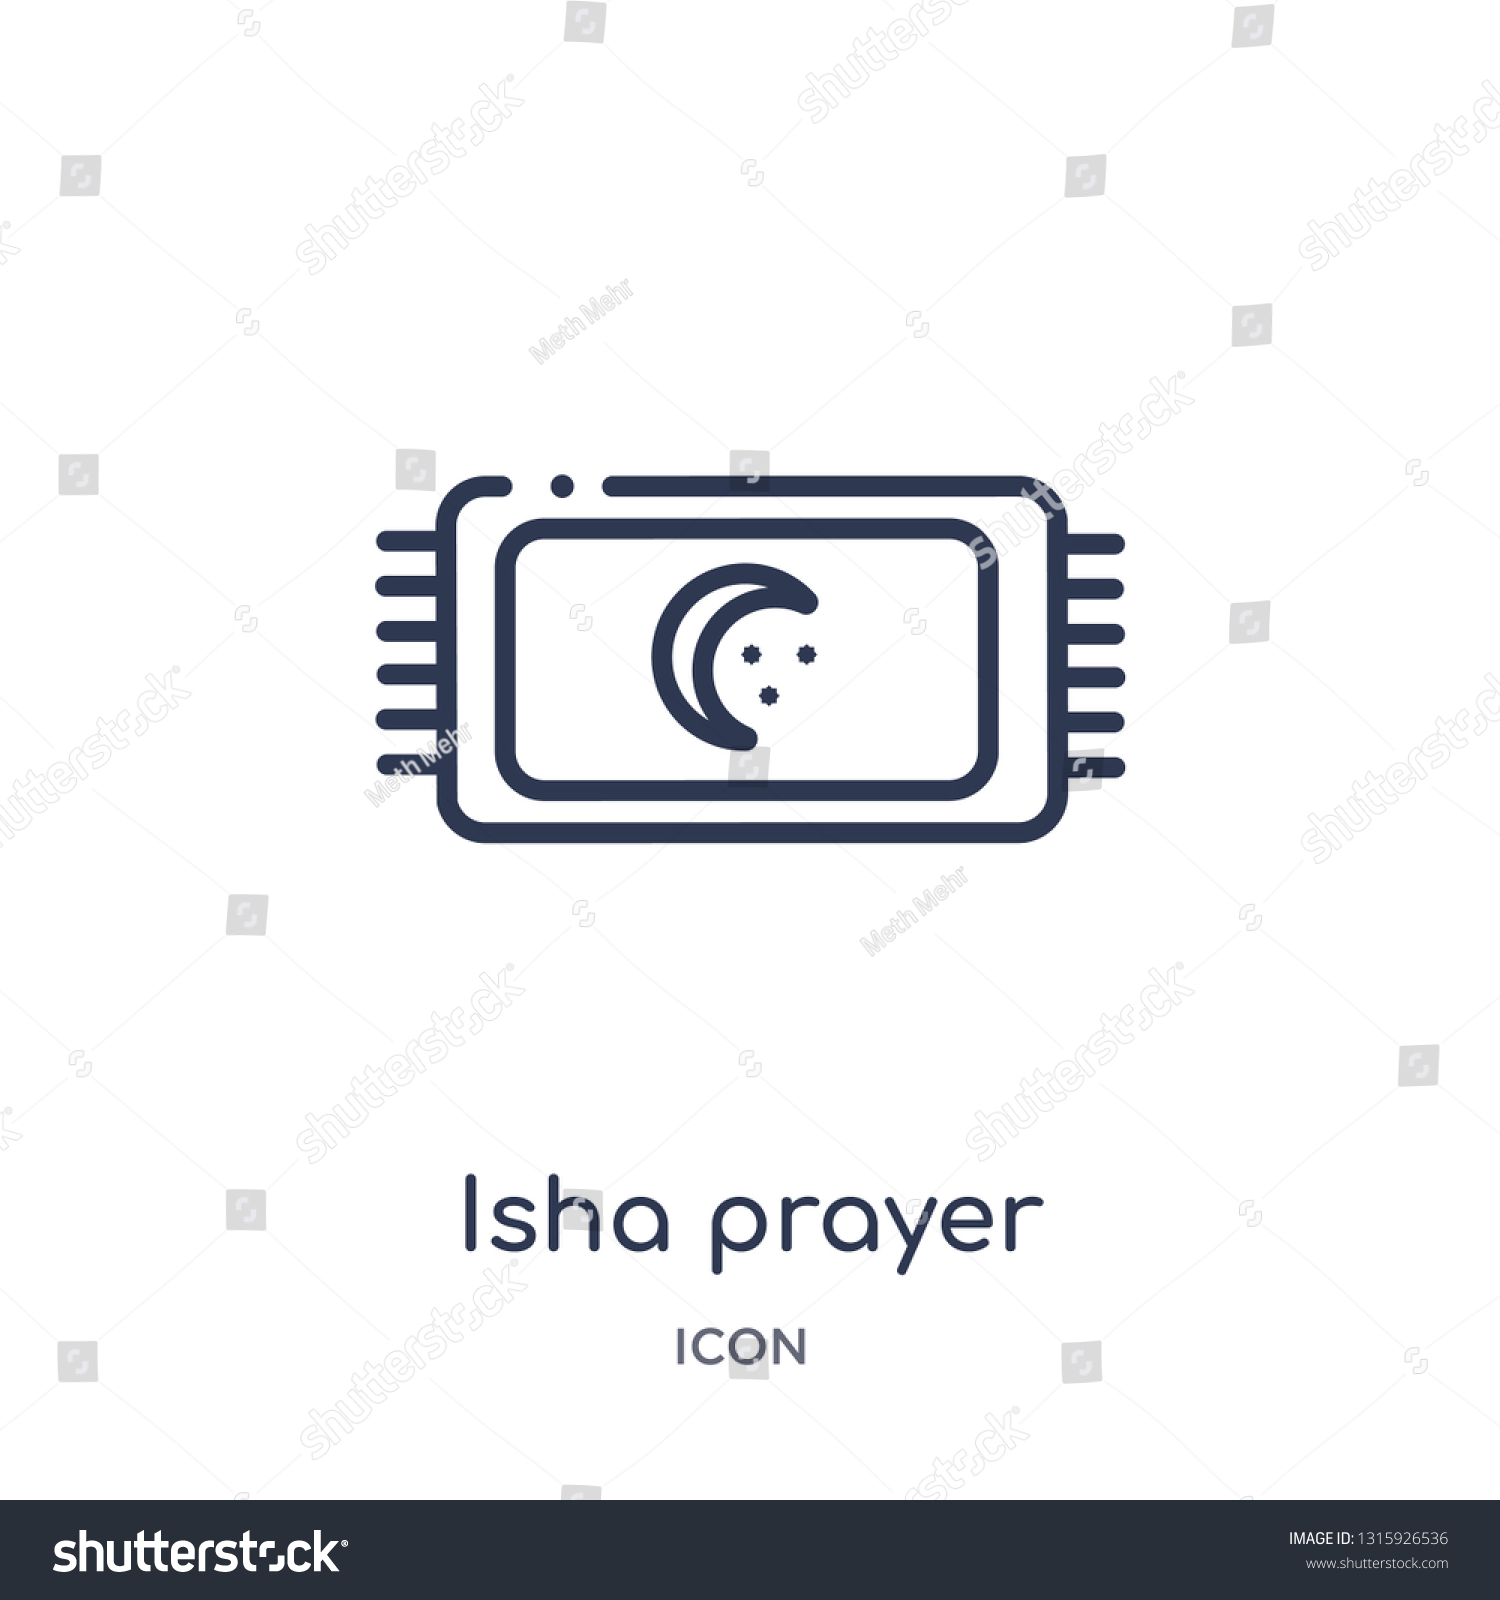 SVG of isha prayer icon from signs outline collection. Thin line isha prayer icon isolated on white background. svg